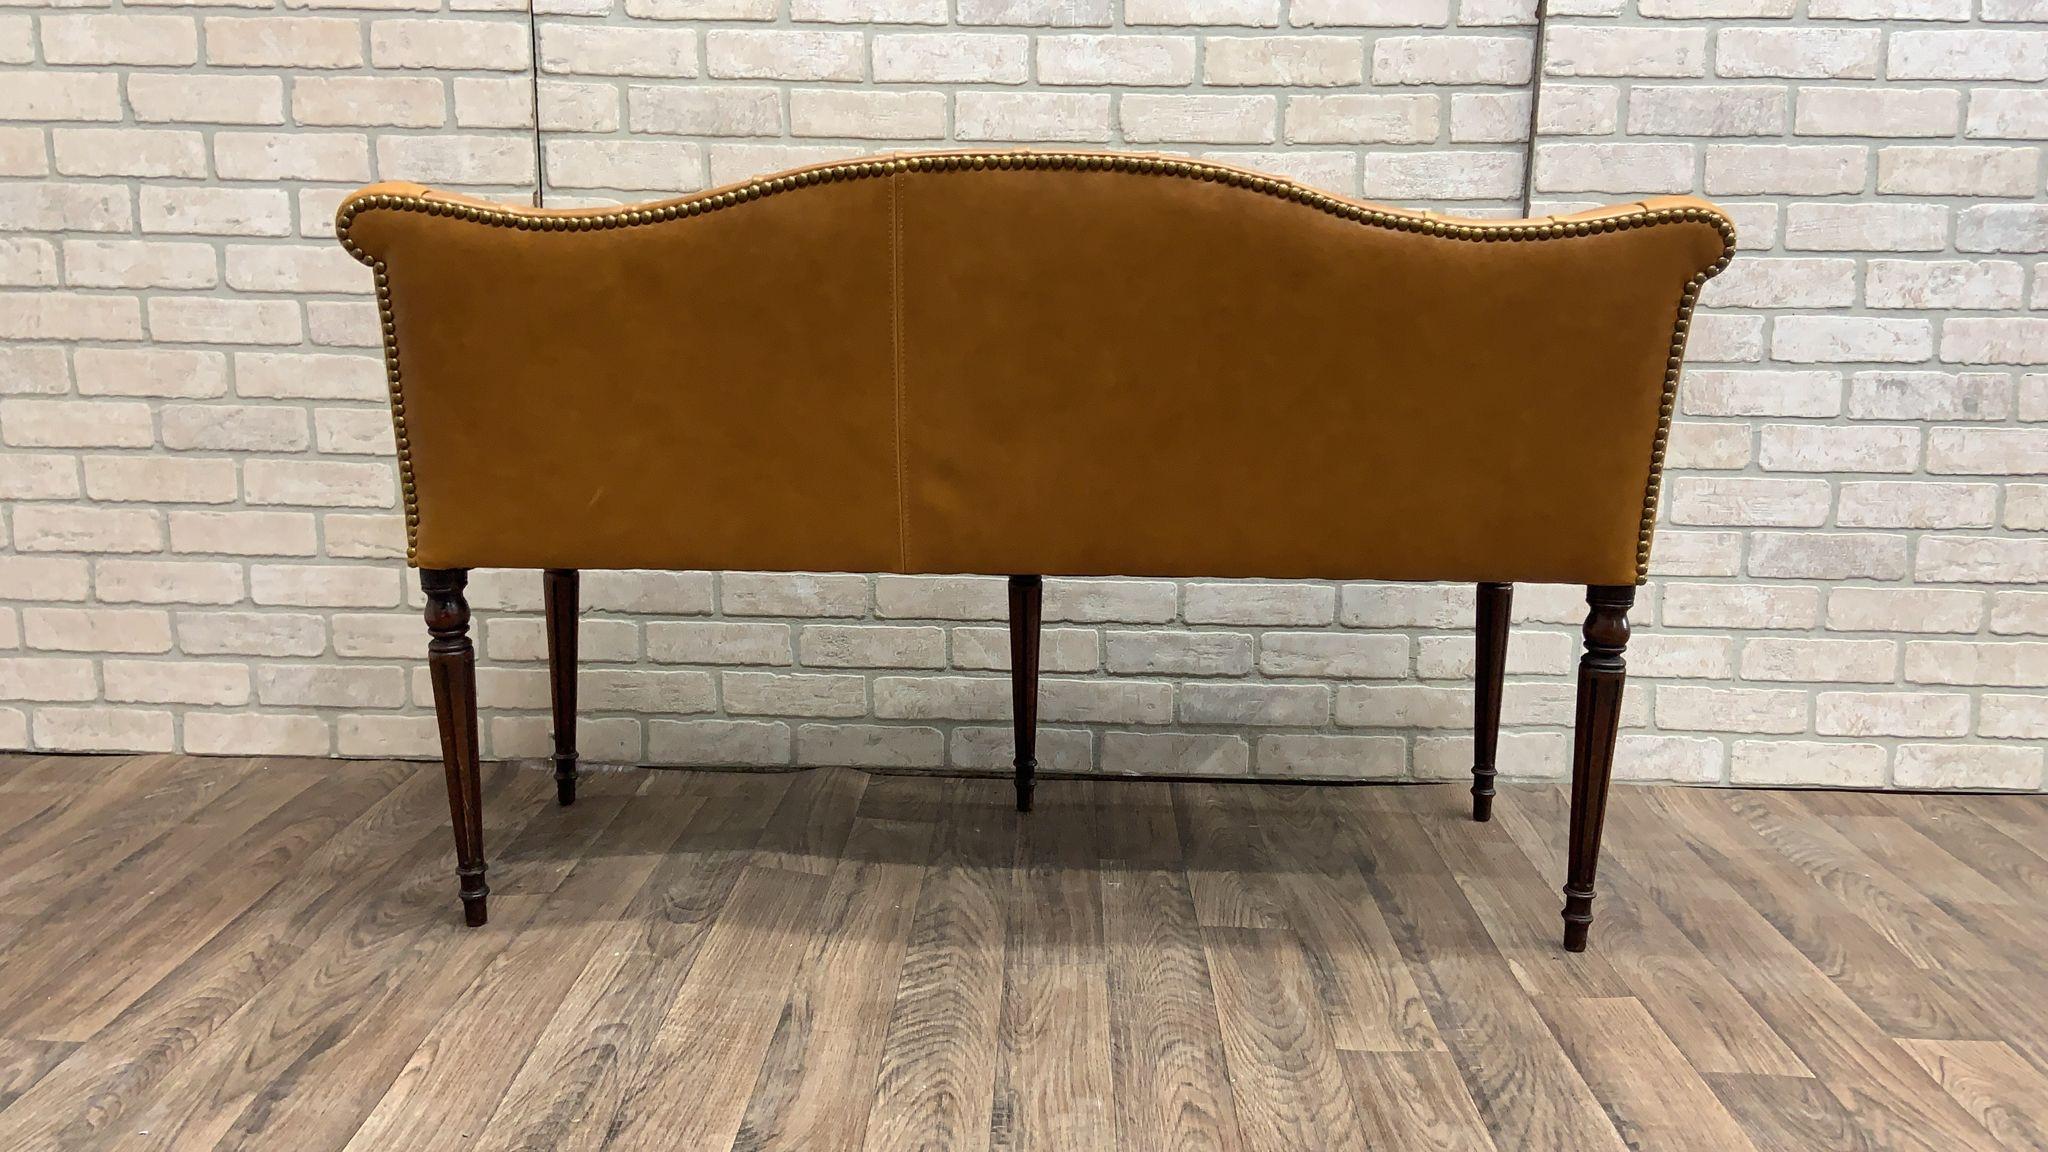 Antique British Colonial Settee Newly Upholstered in Cognac Leather For Sale 6